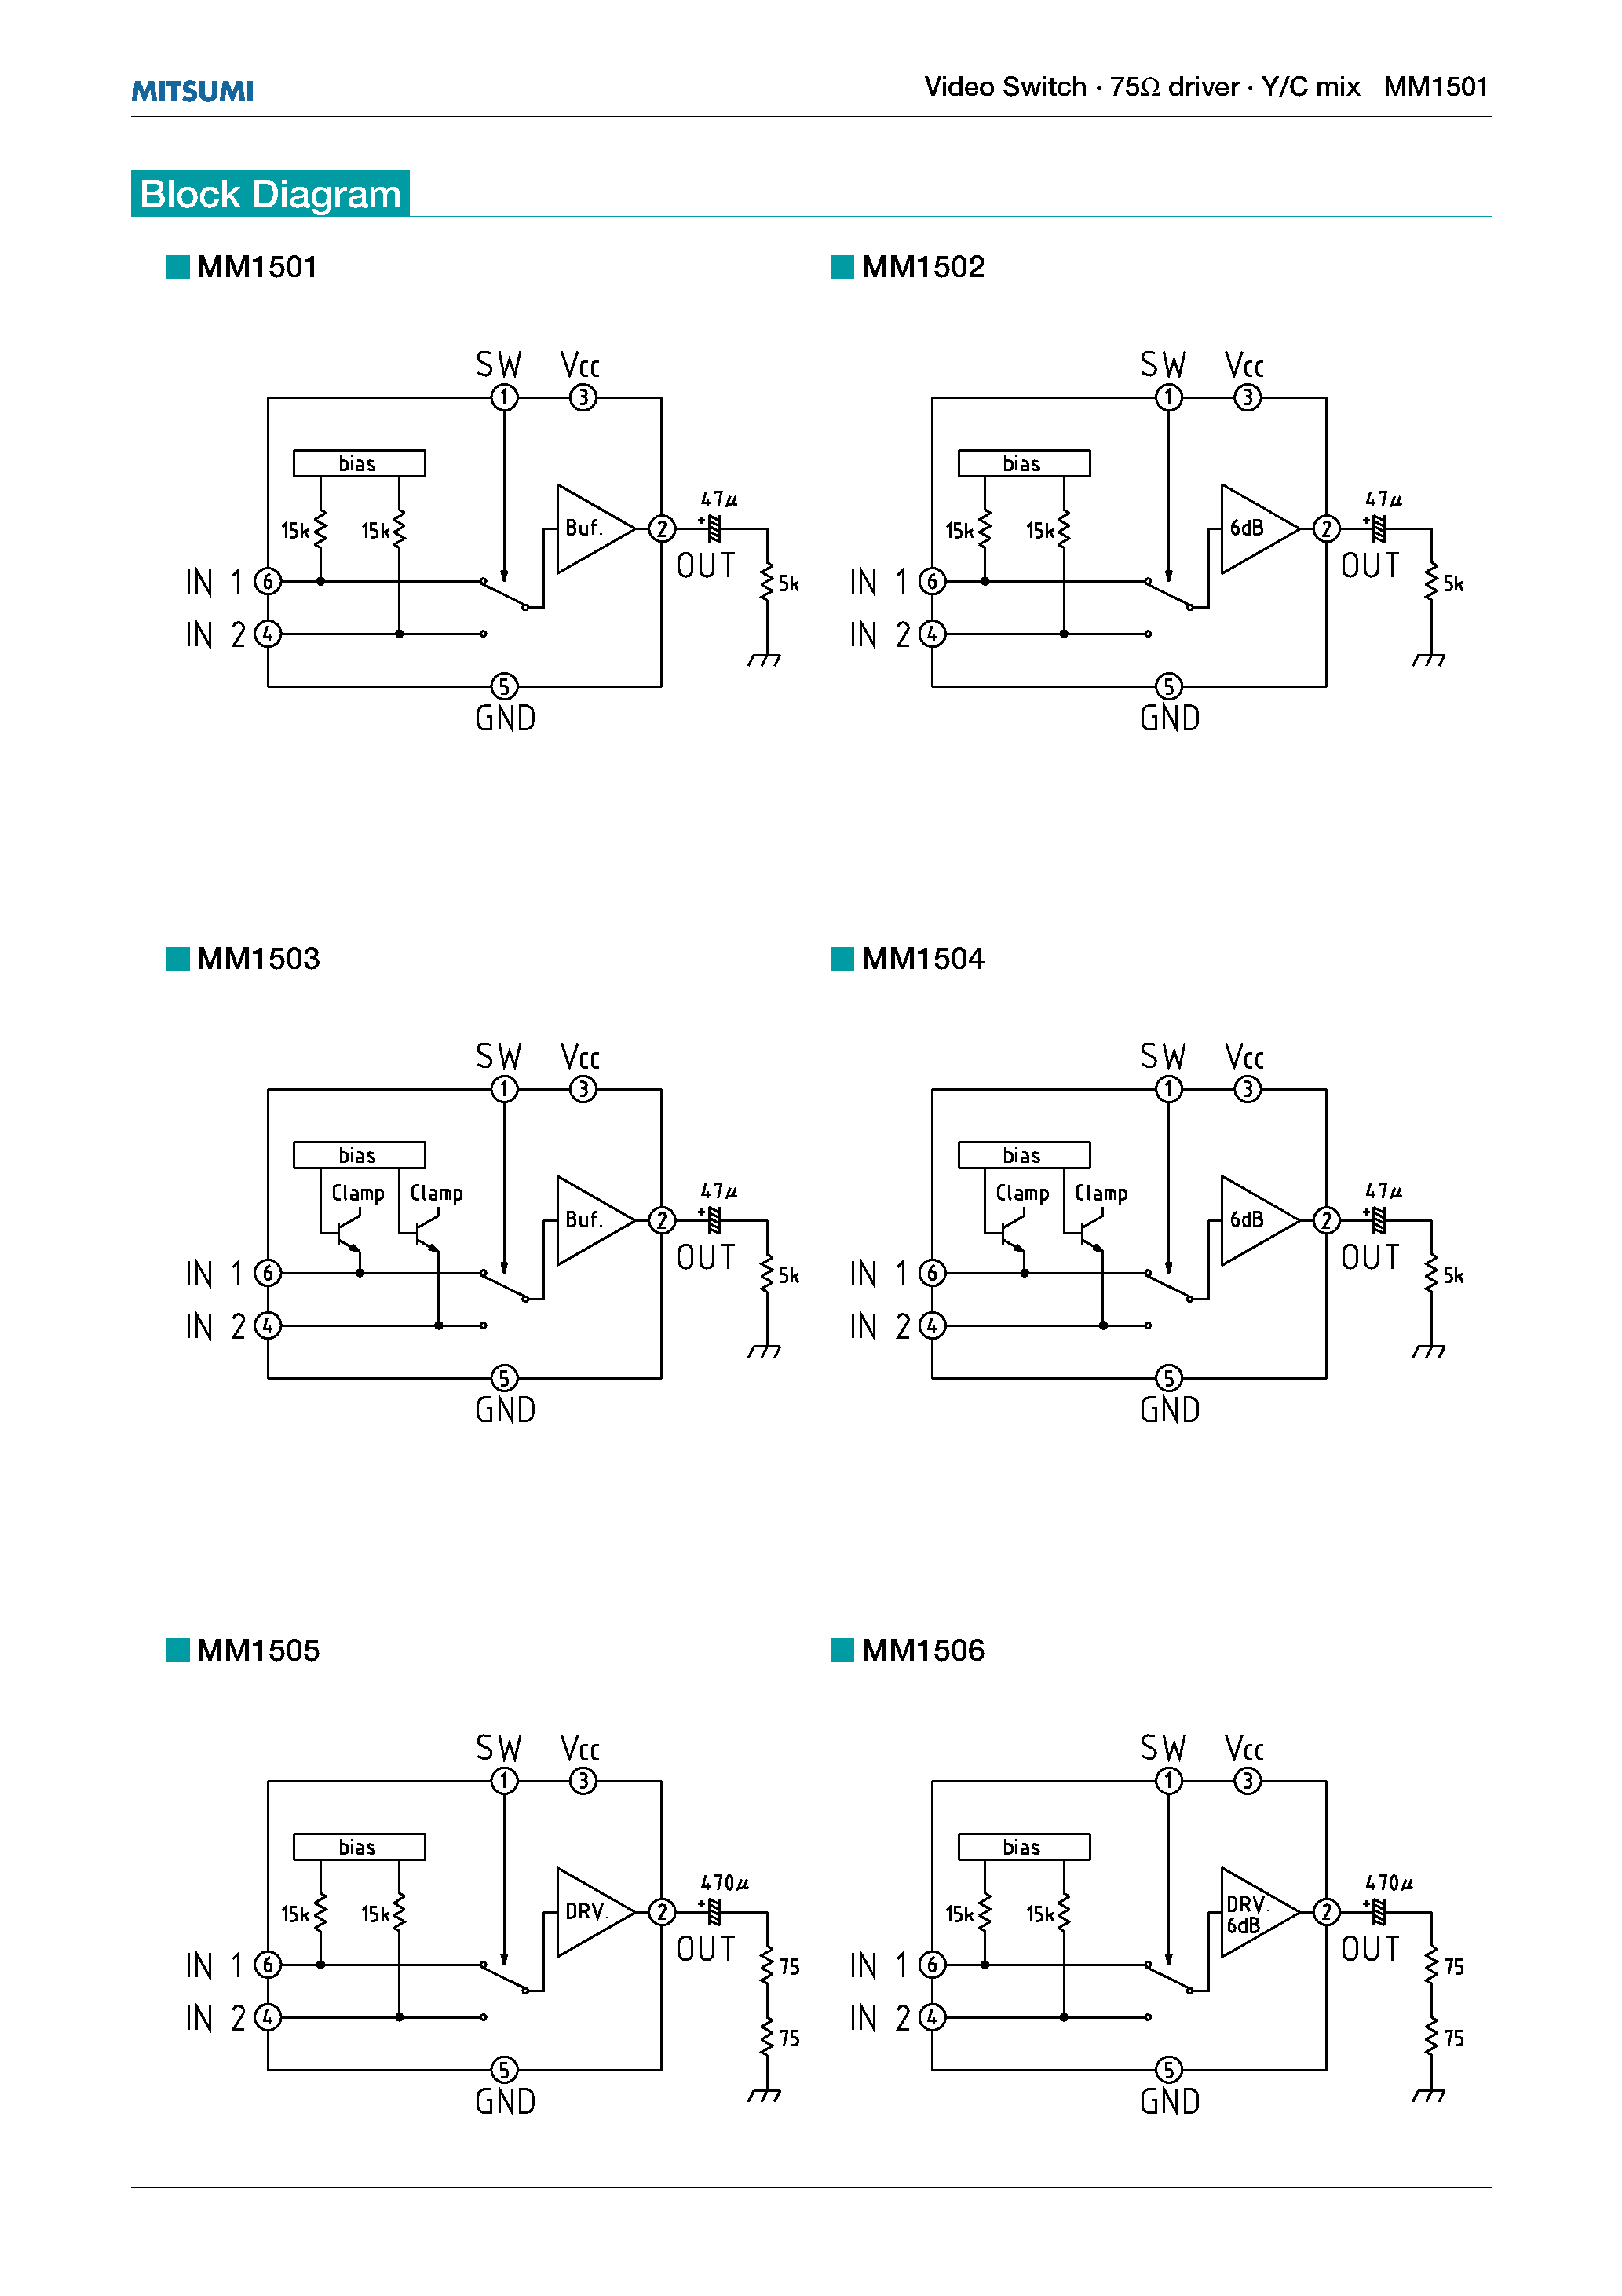 Datasheet MM1509 - Video Switch 75 driver Y/C mix page 2